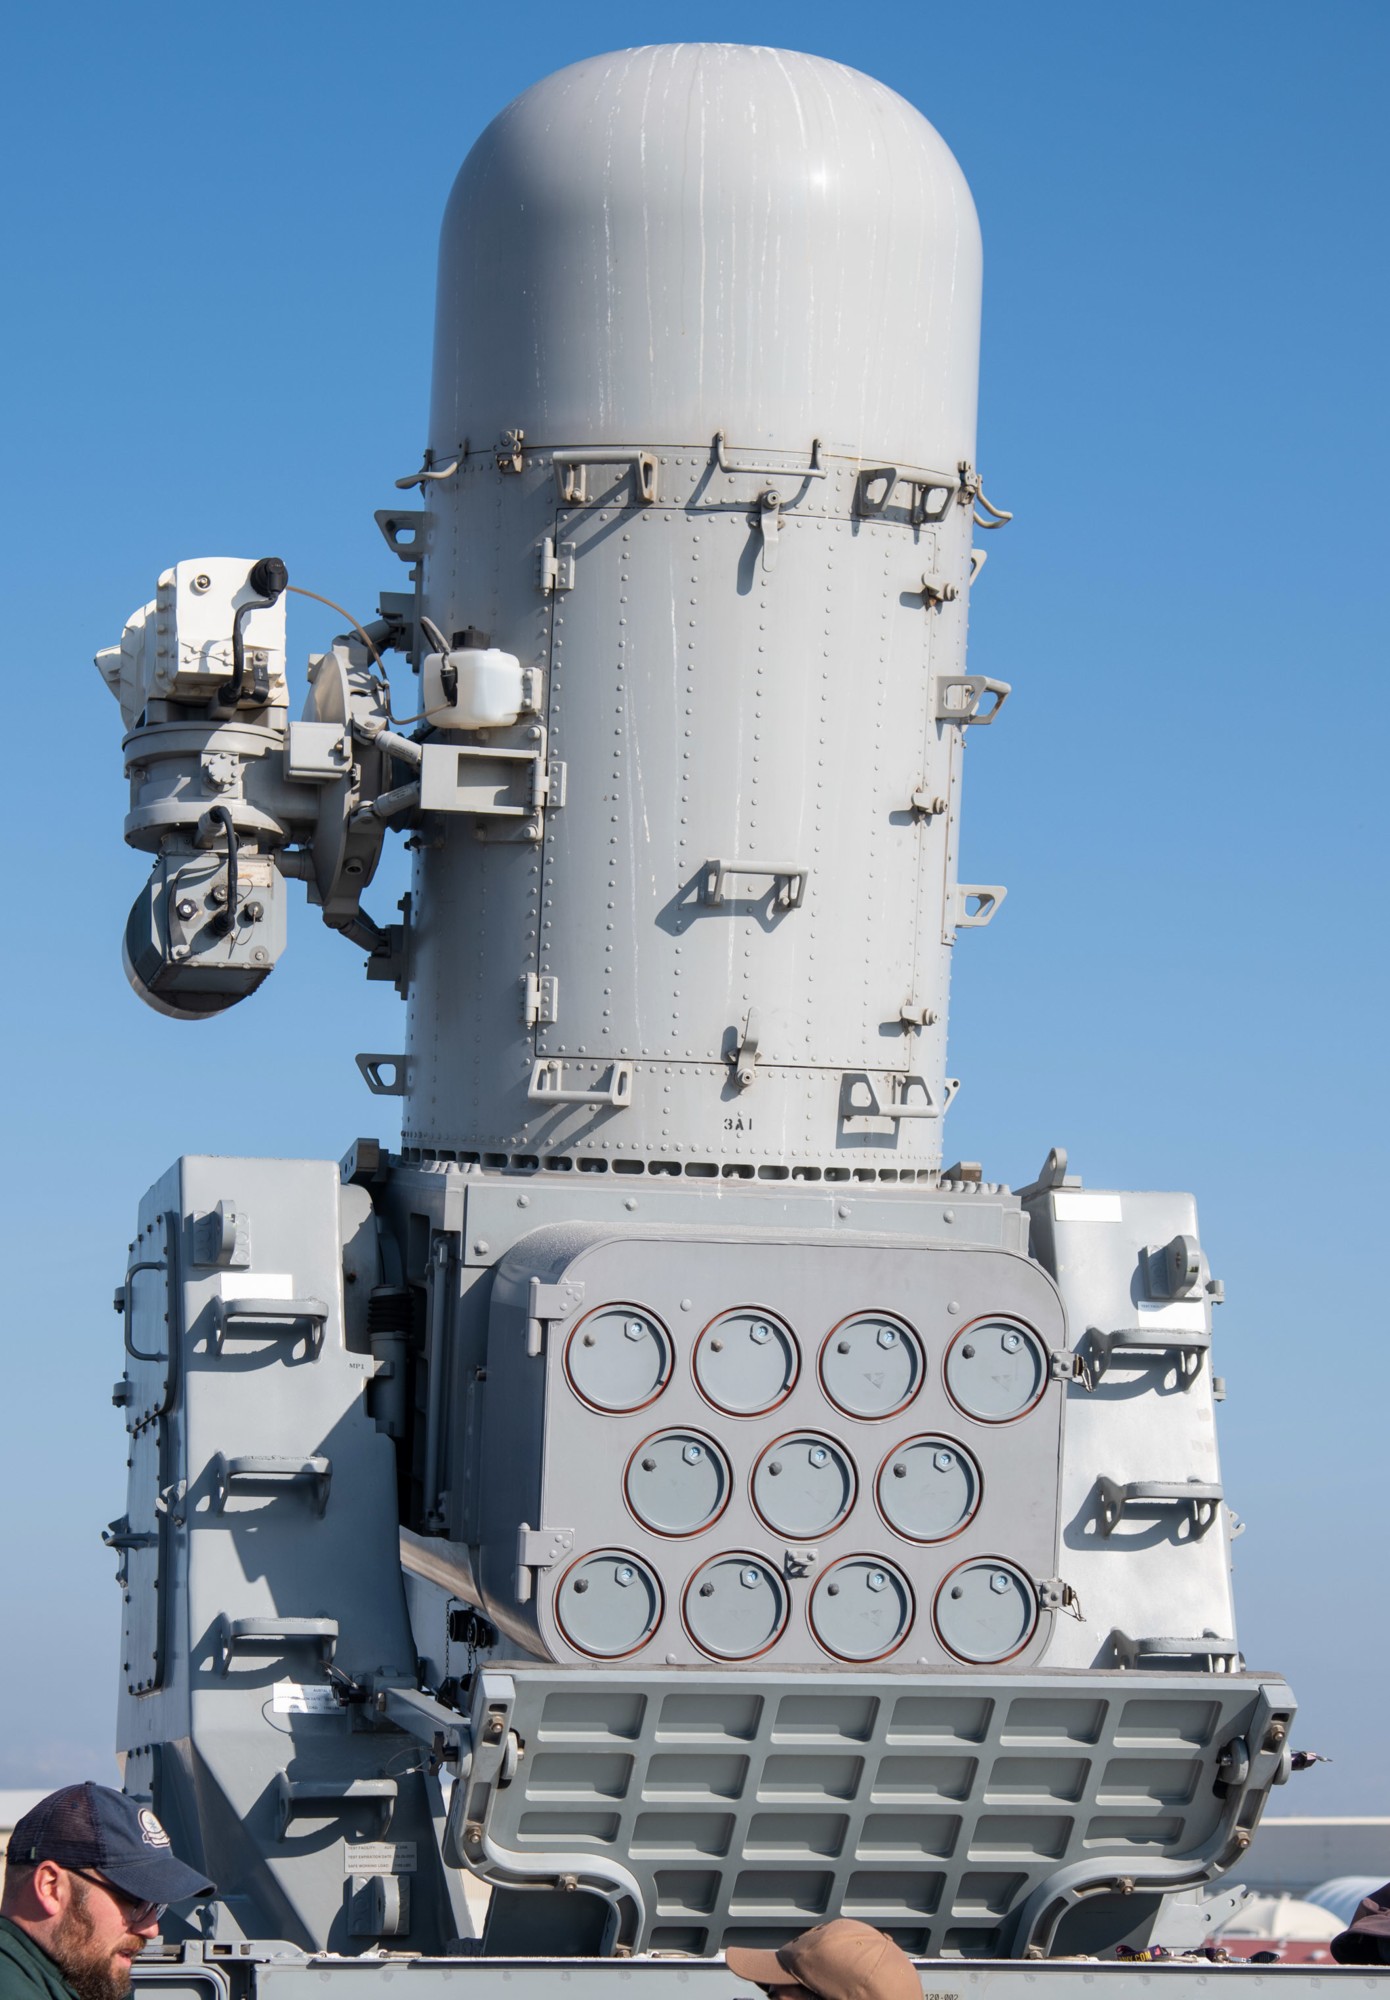 lcs-26 uss mobile independence class littoral combat ship us navy mk.15 mod.31 searam close-in weapon system ciws 20